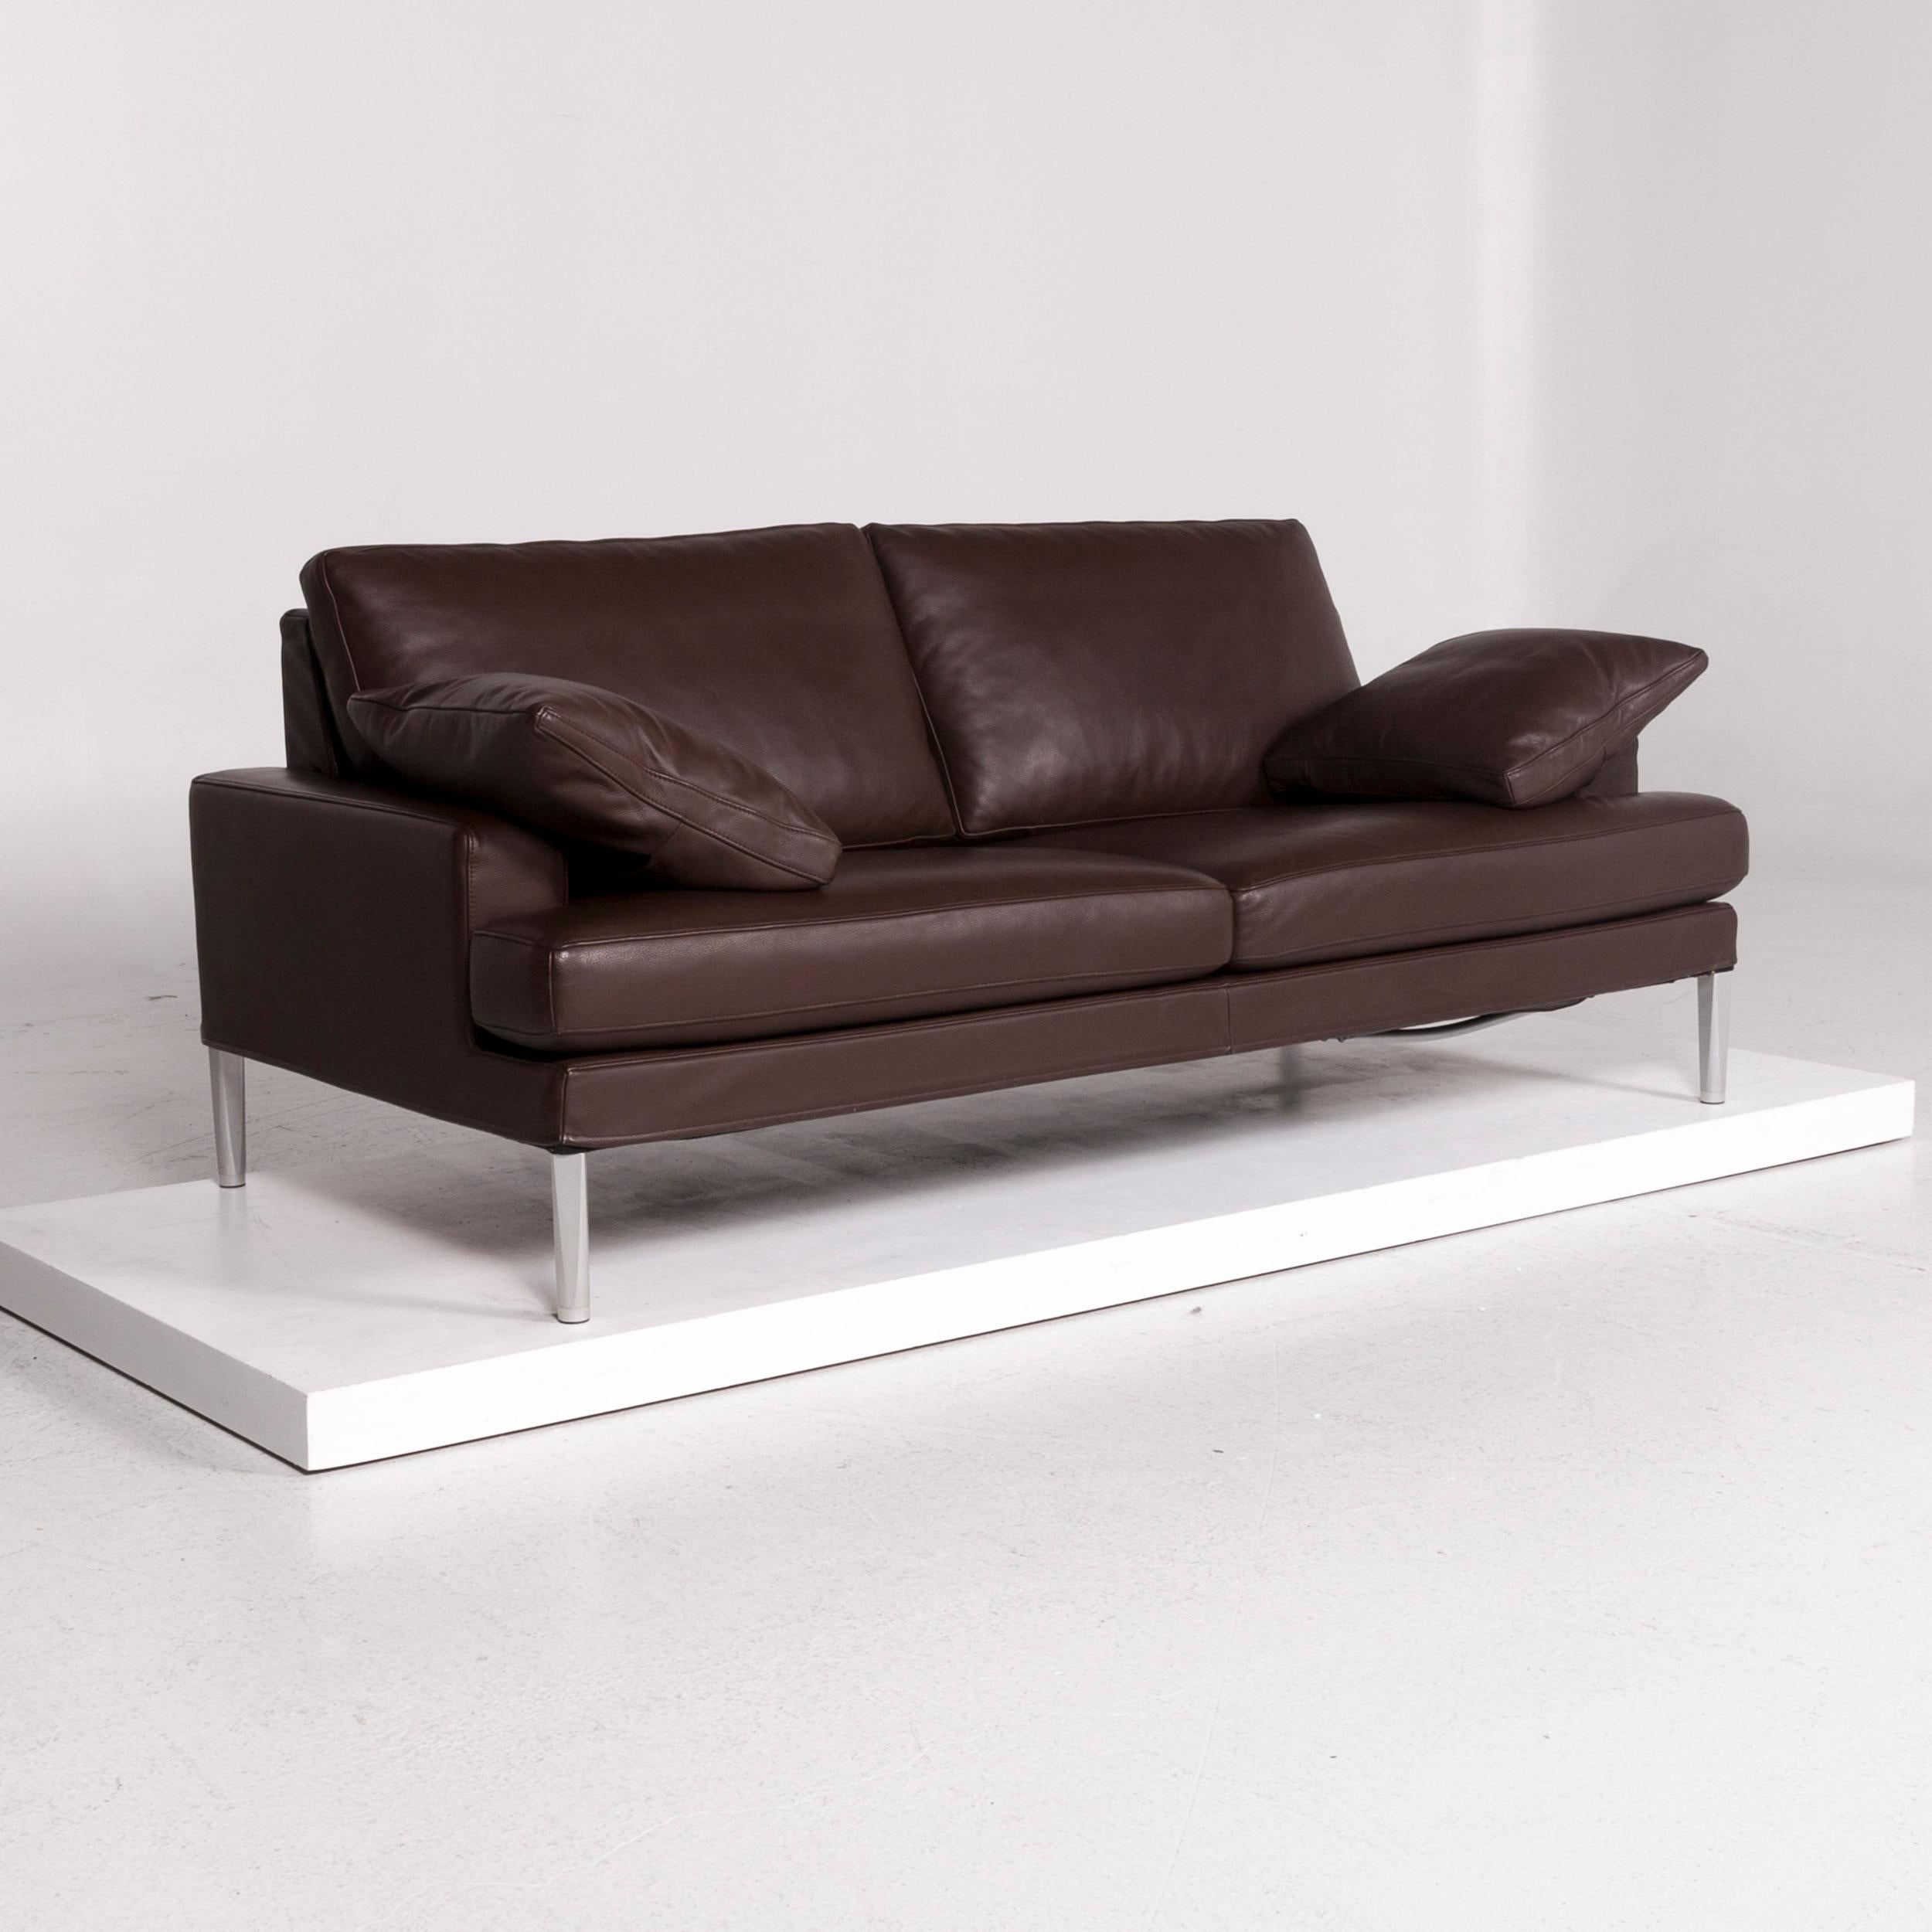 We bring to you a FSM Clarus leather sofa set brown dark brown 1 three-seat 1 two-seat.


 Product measurements in centimeters:
 

 Depth 86
Width 189
Height 81
Seat-height 44
Rest-height 54
Seat-depth 51
Seat-width 128
Back-height